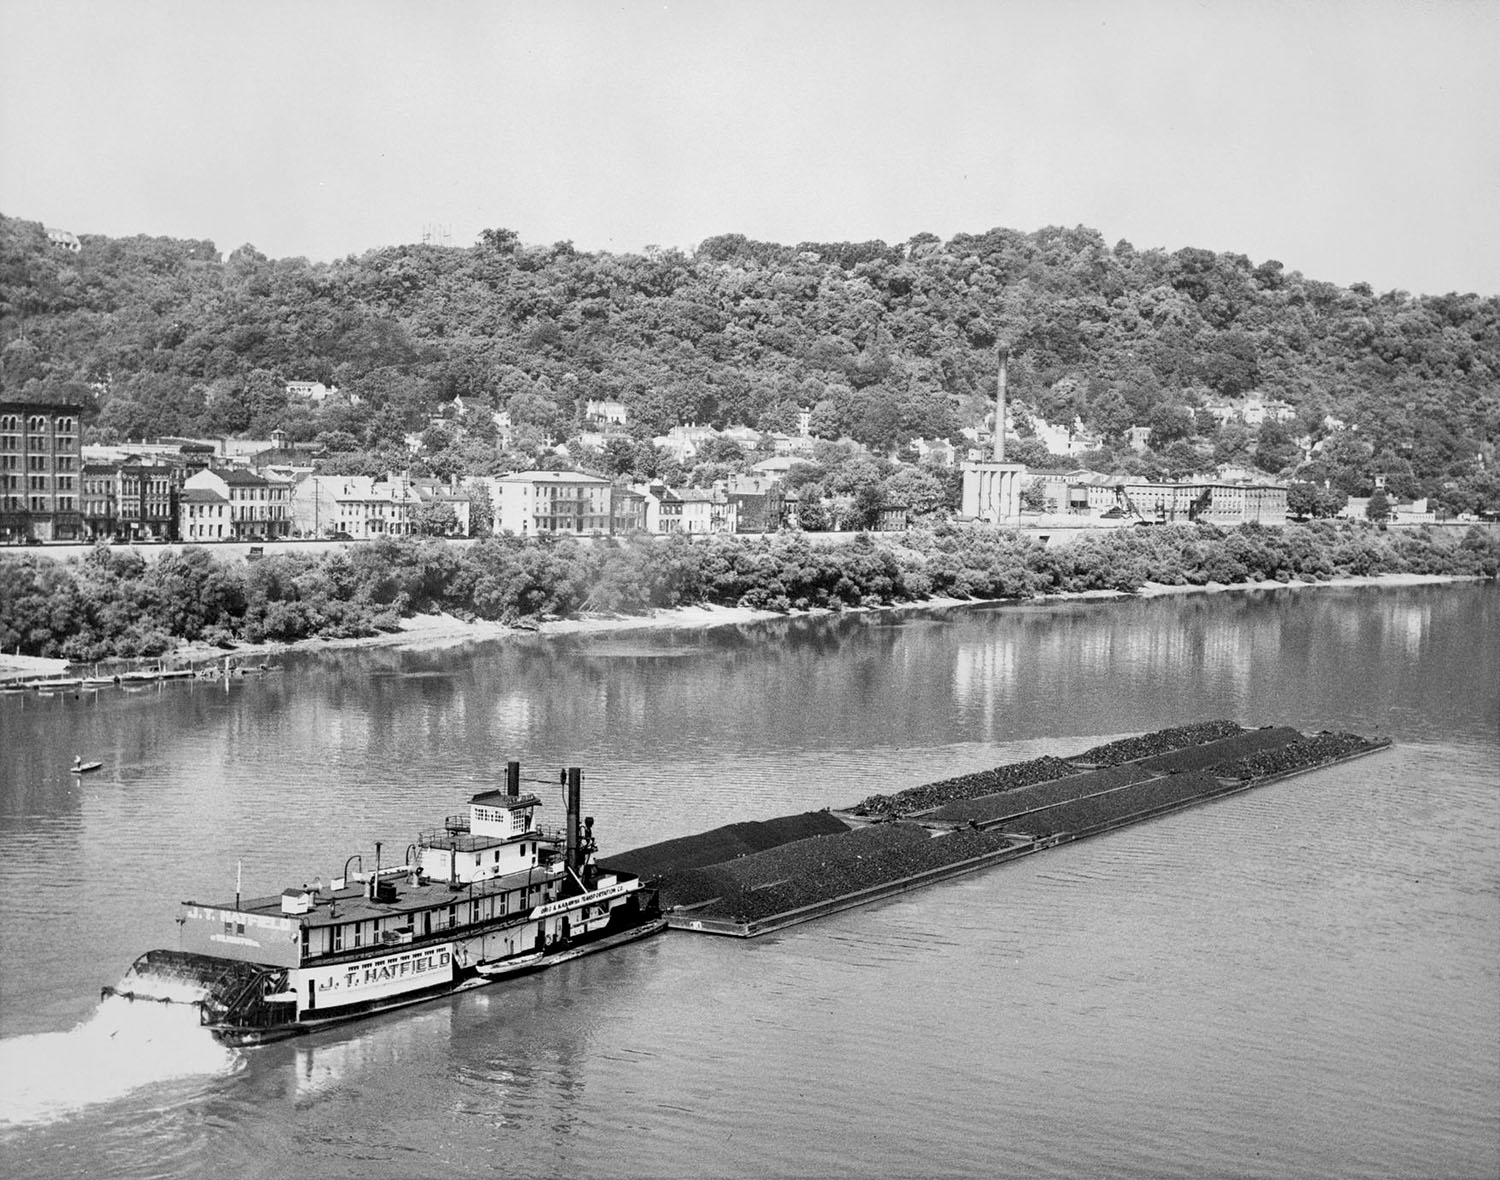 The J.T. Hatfield downbound at Maysville, Ky. (David Smith collection)